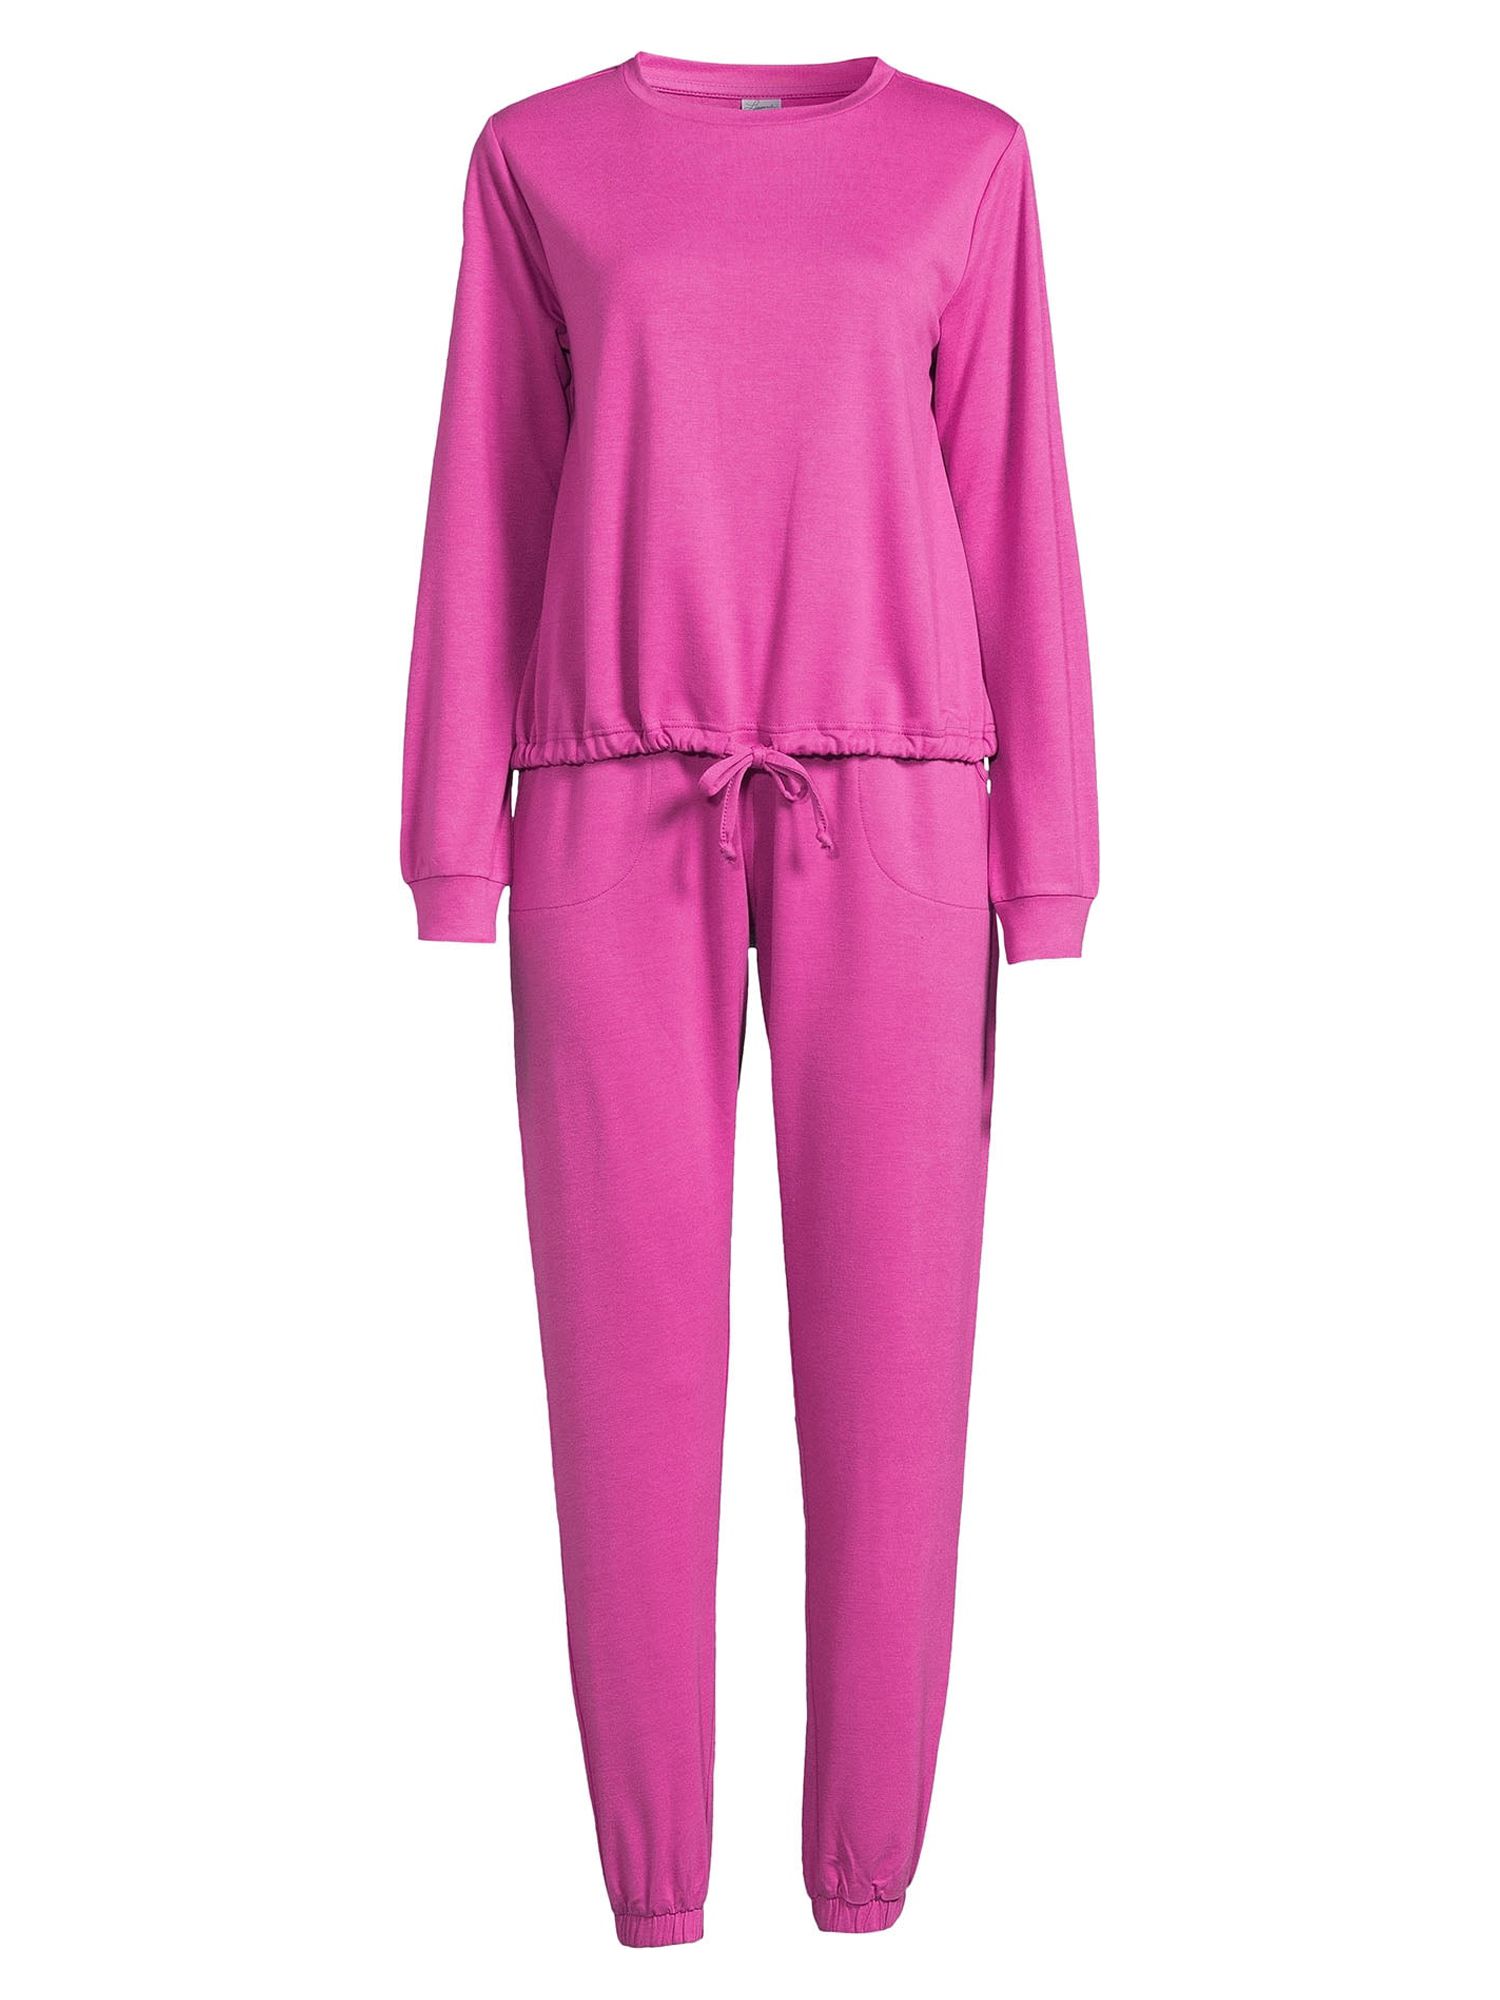 Lissome Women's and Women's Plus L/S French Terry 2-Piece PJ Set - image 5 of 6